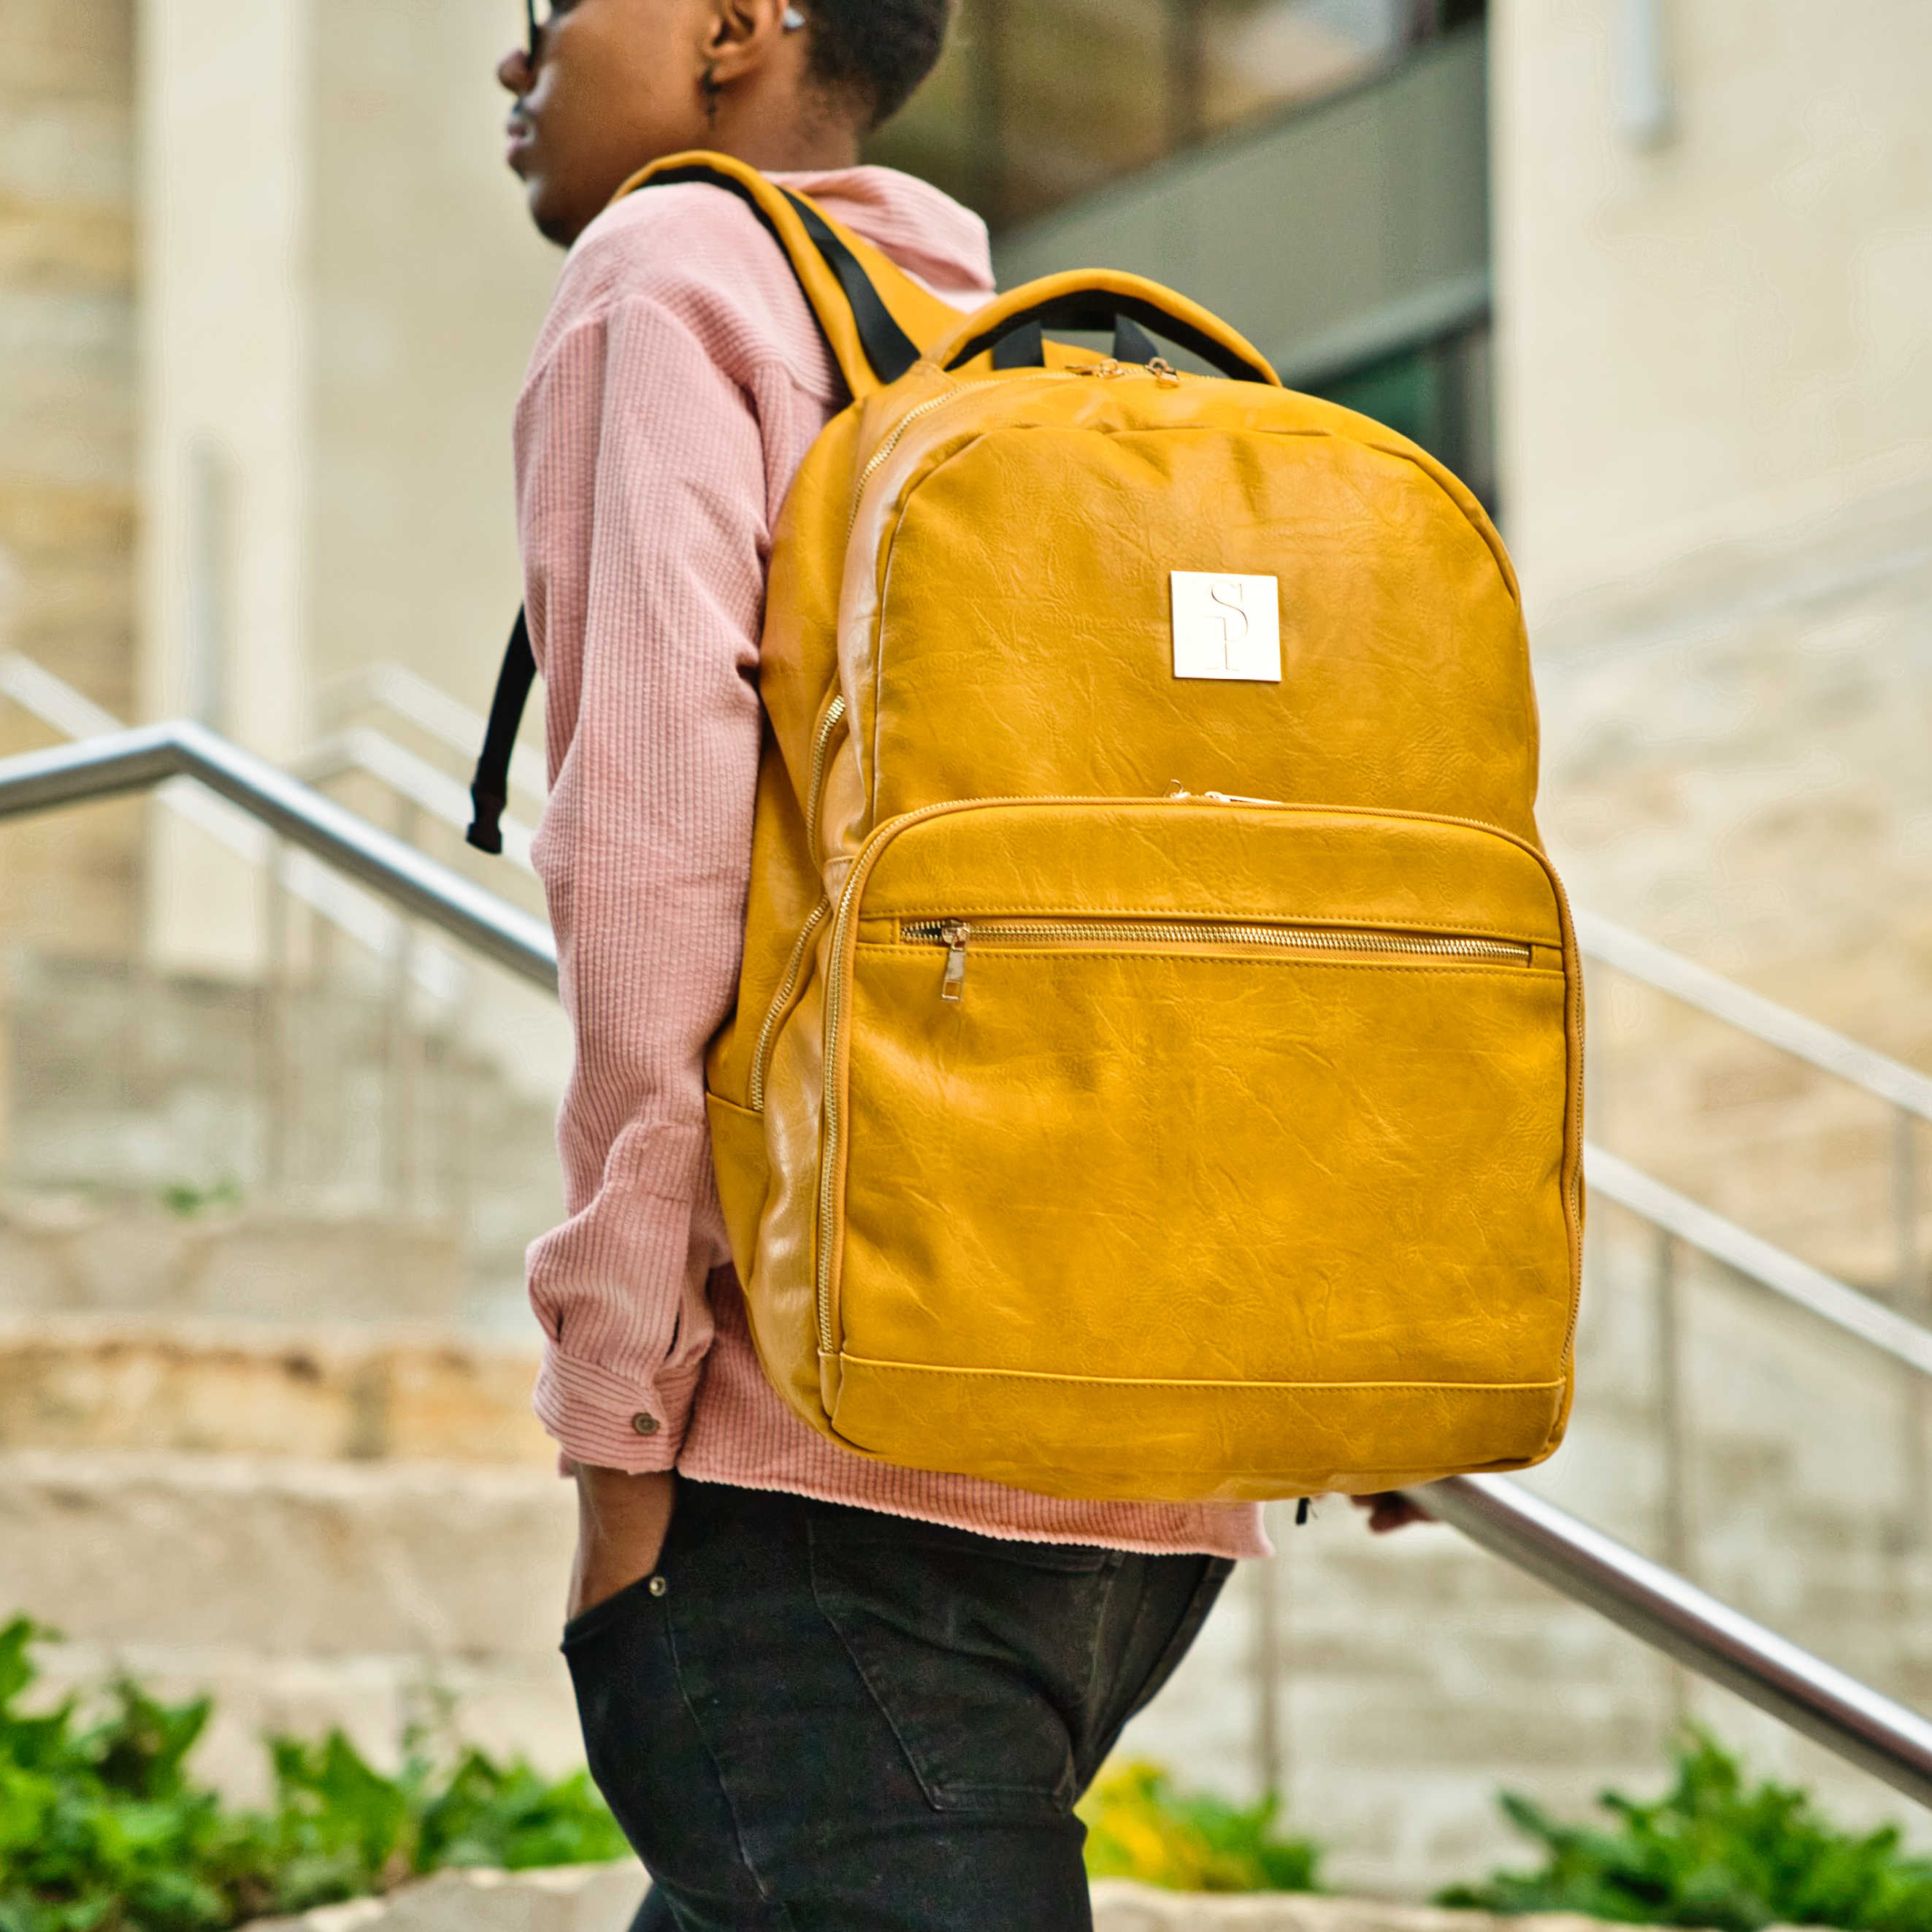 Yellow Tumbled Leather Commuter Bag - Sole Premise